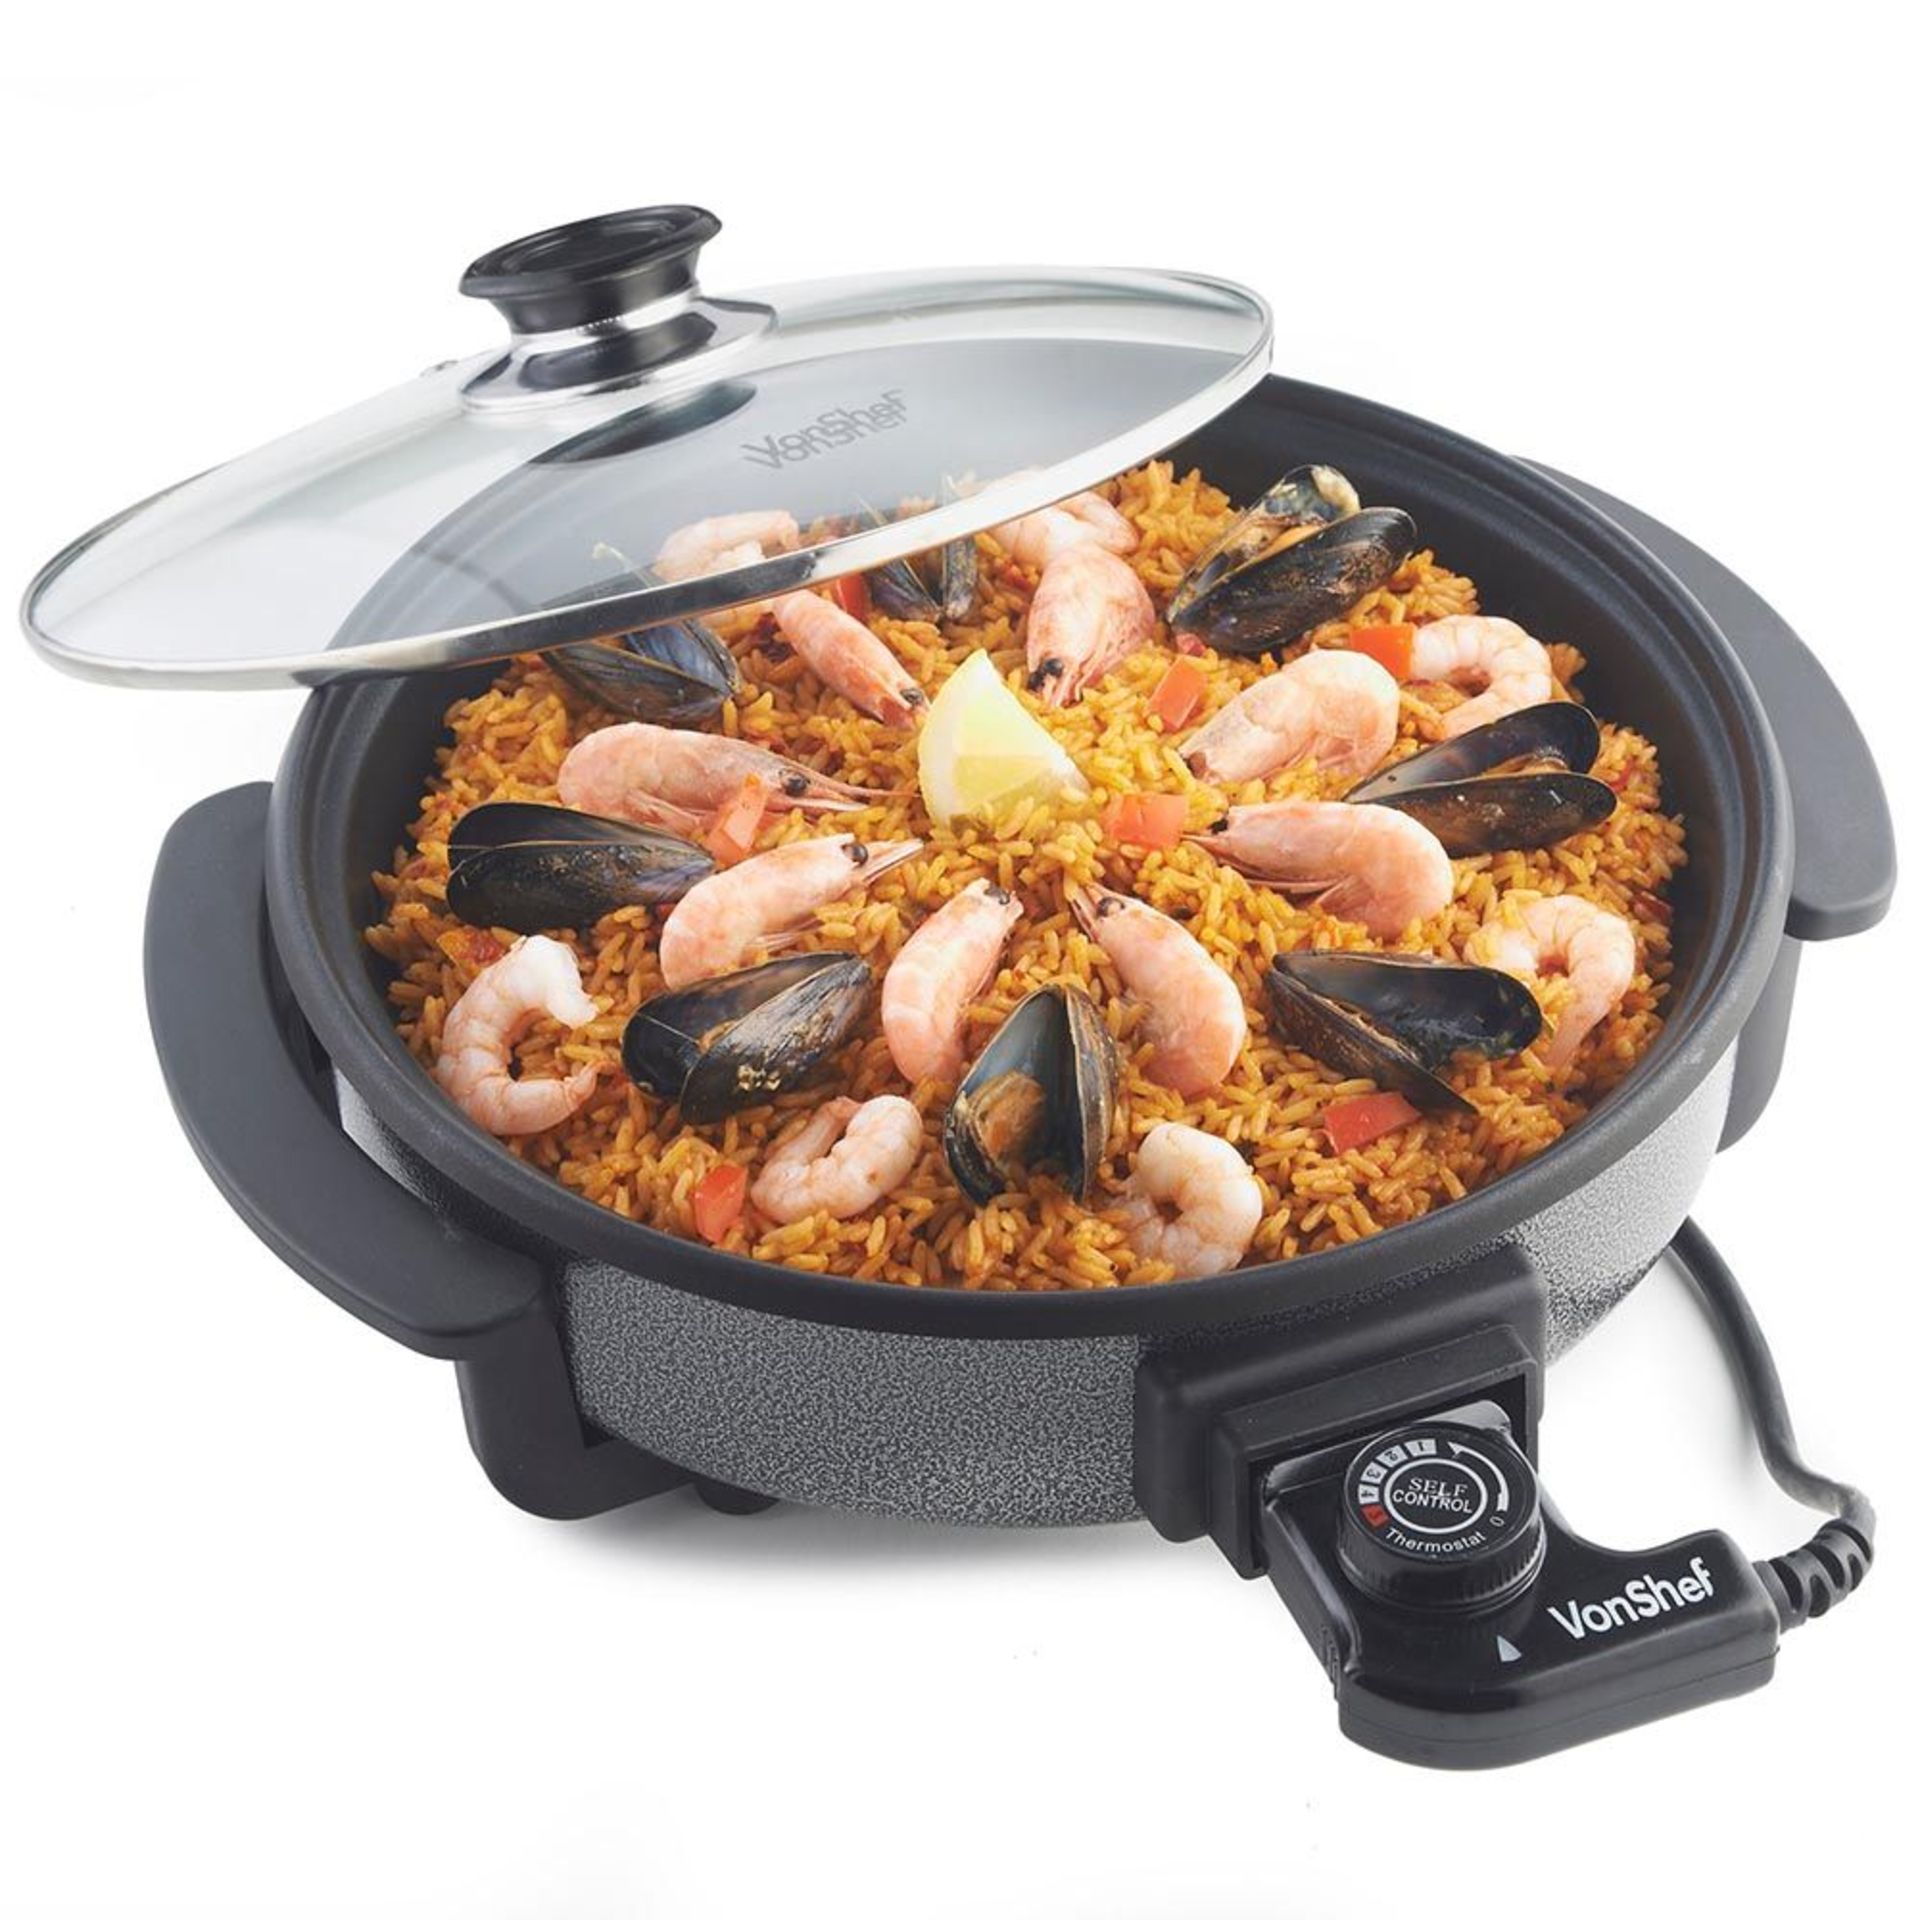 (KG38) 30cm Round Multi Cooker. Convenient and easy to use cooker that frys, Sautés, Braises, ... - Image 3 of 5